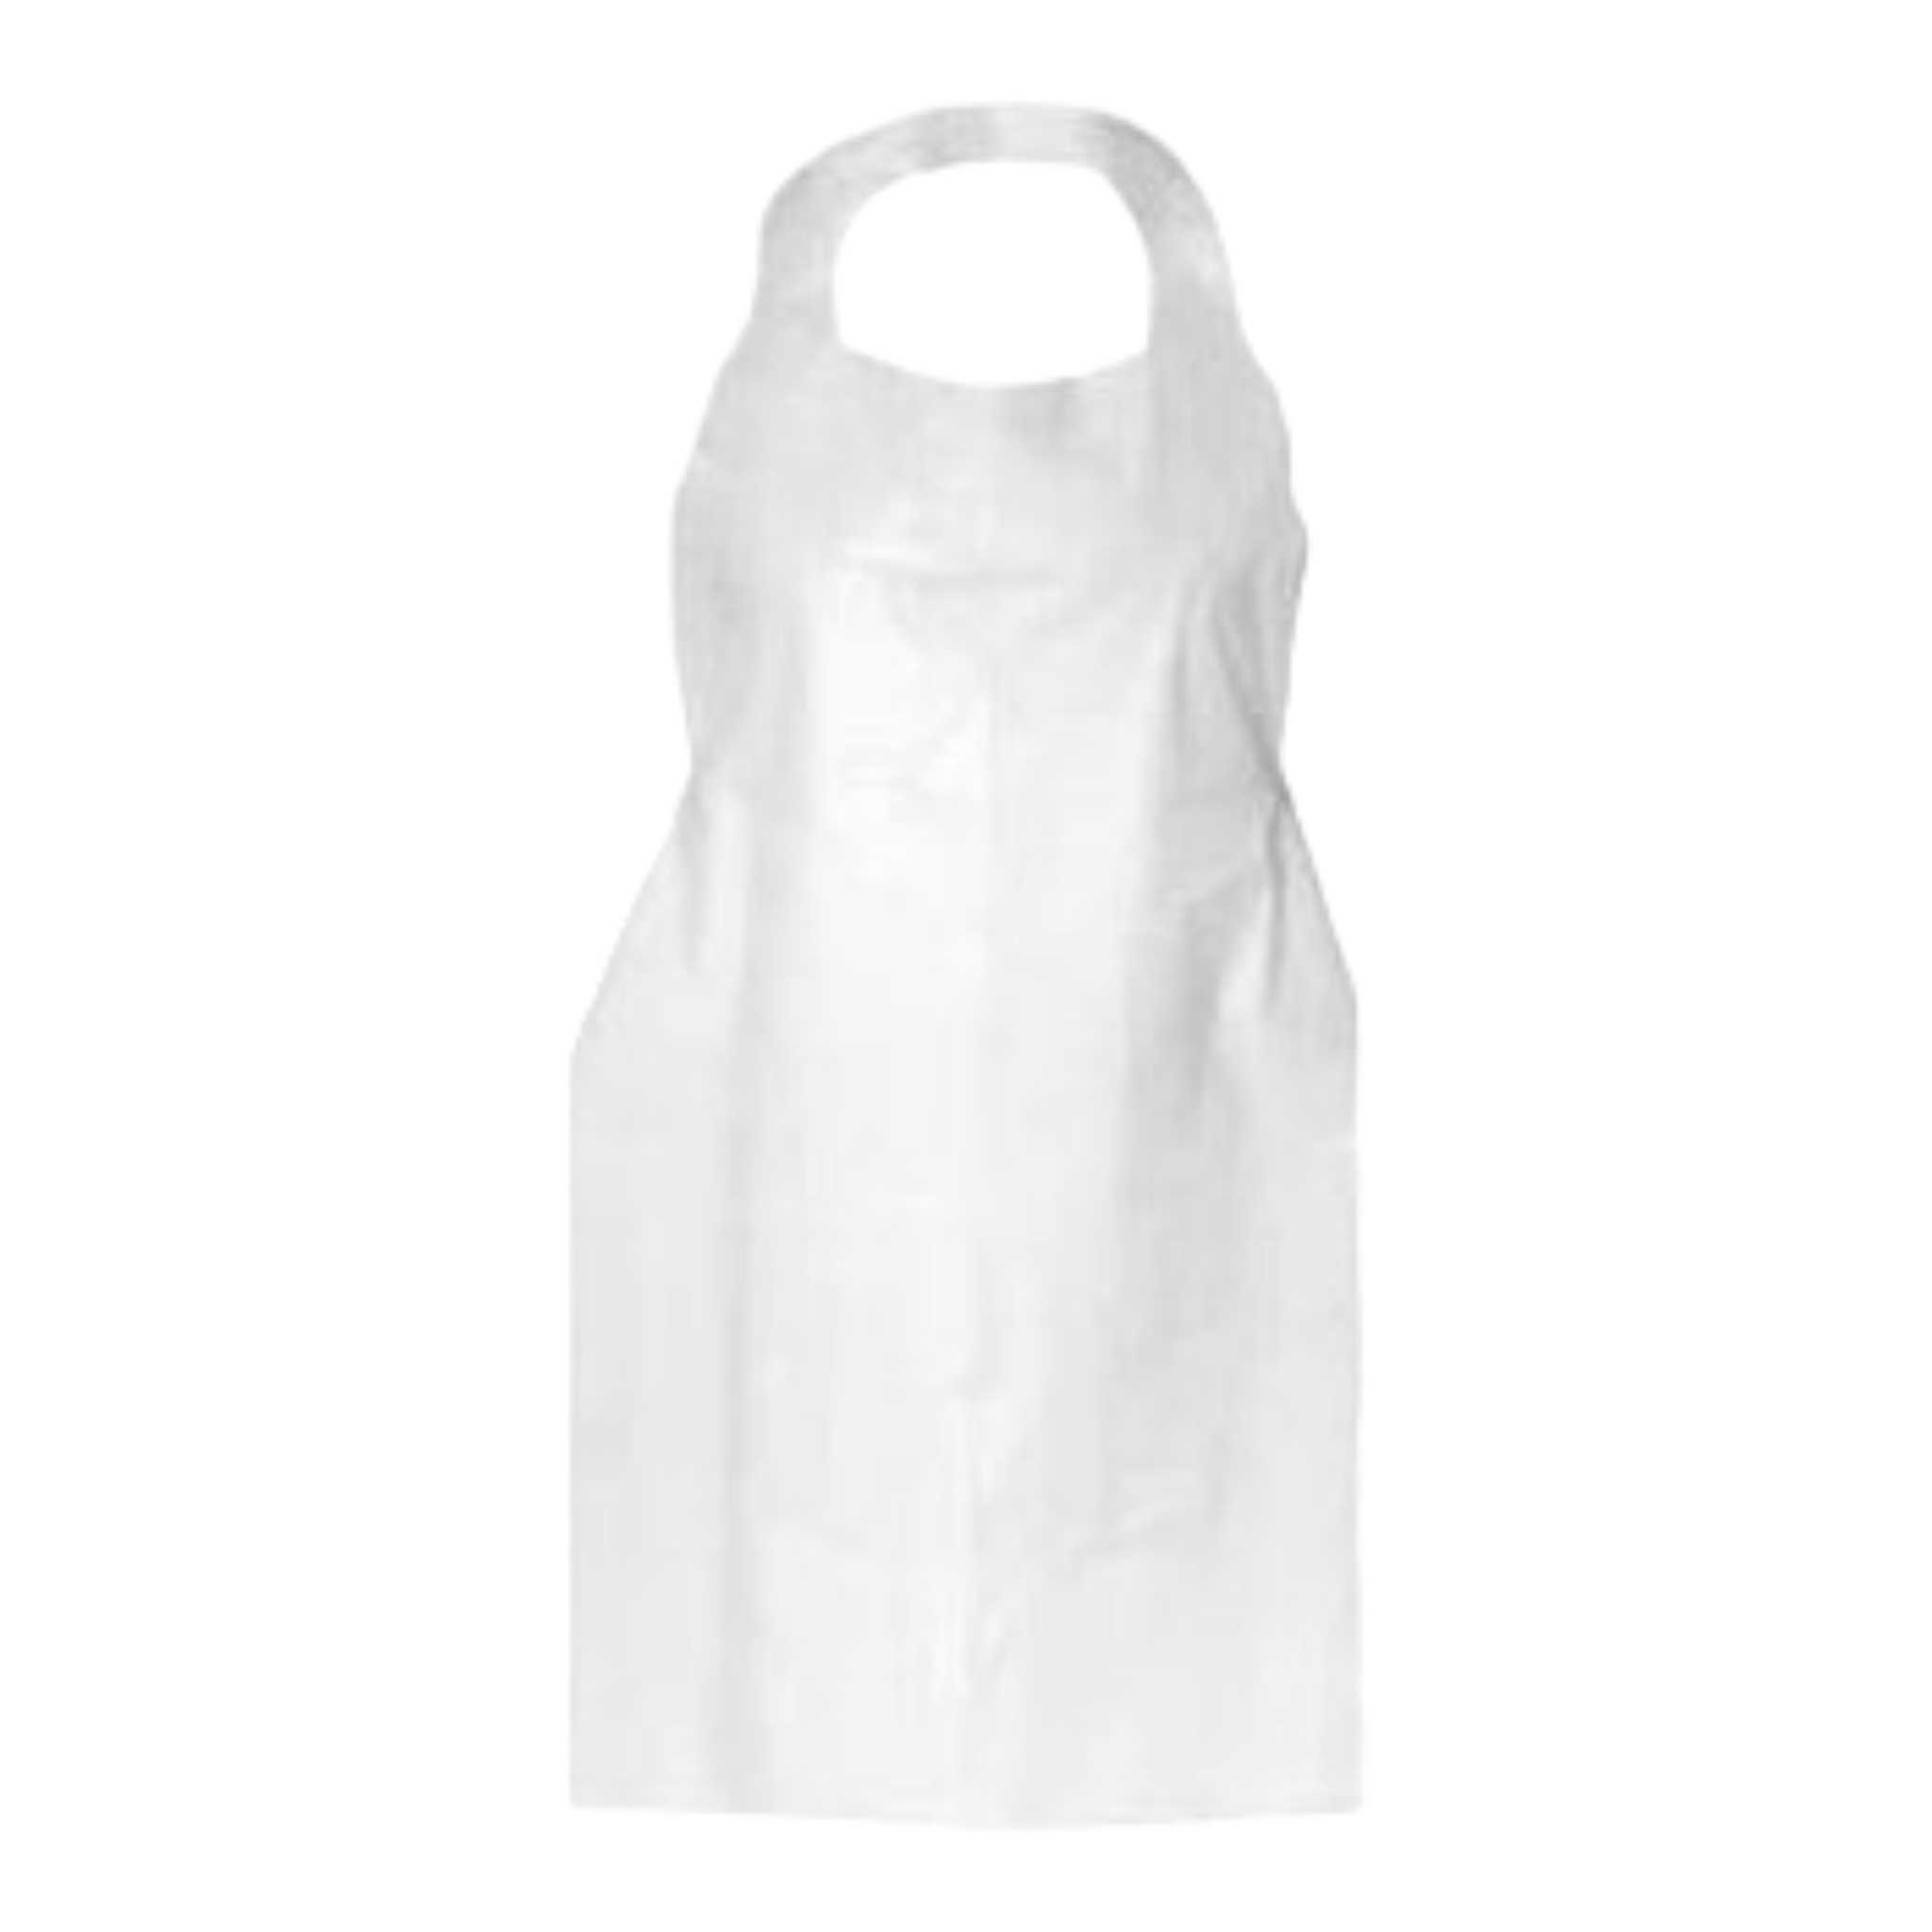 Apron Disposable Plastic White 660x985+25mmx20mic 25pack